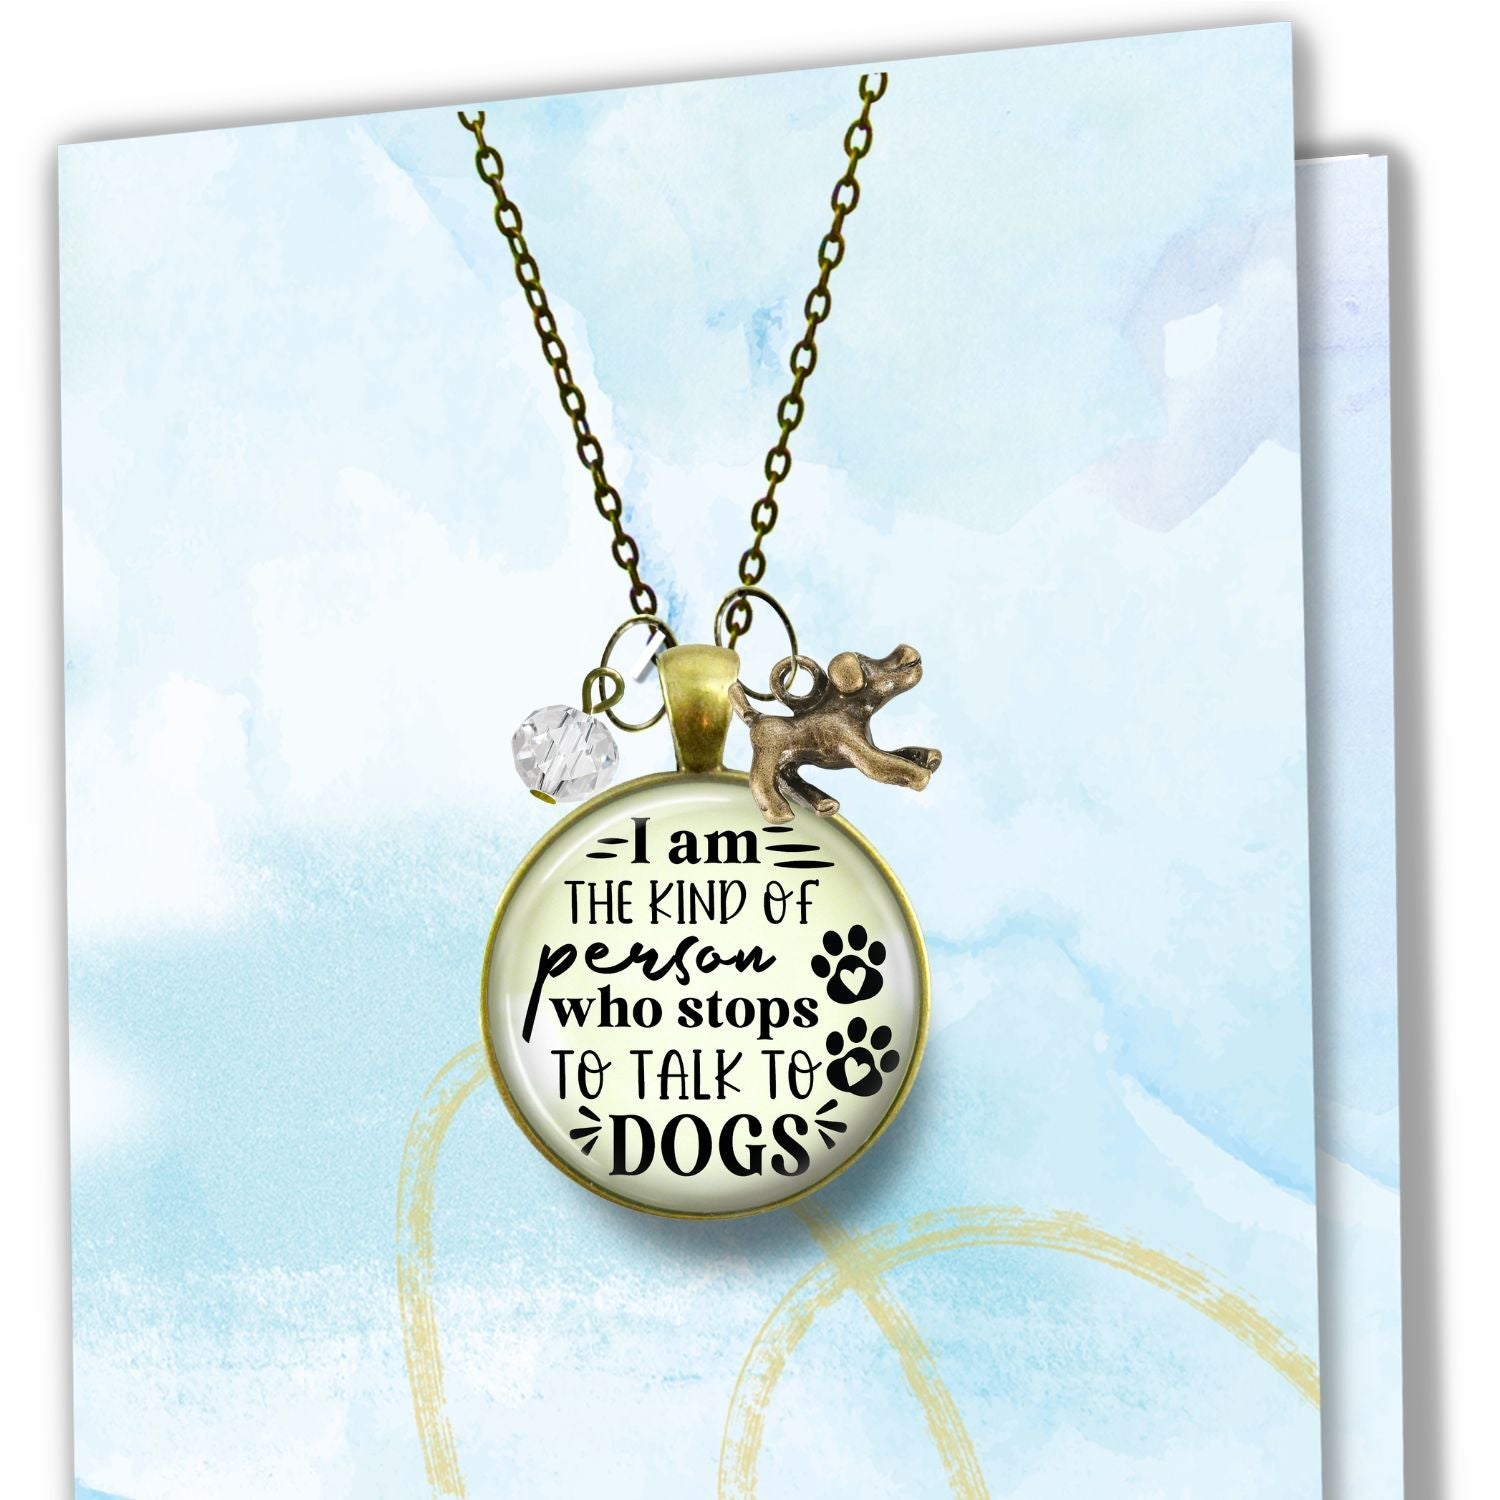 Handmade Gutsy Goodness Jewelry I Am The Kind Of Person Who Stops To Talk To Dogs Necklace Pet Lover Jewelry & Message Card